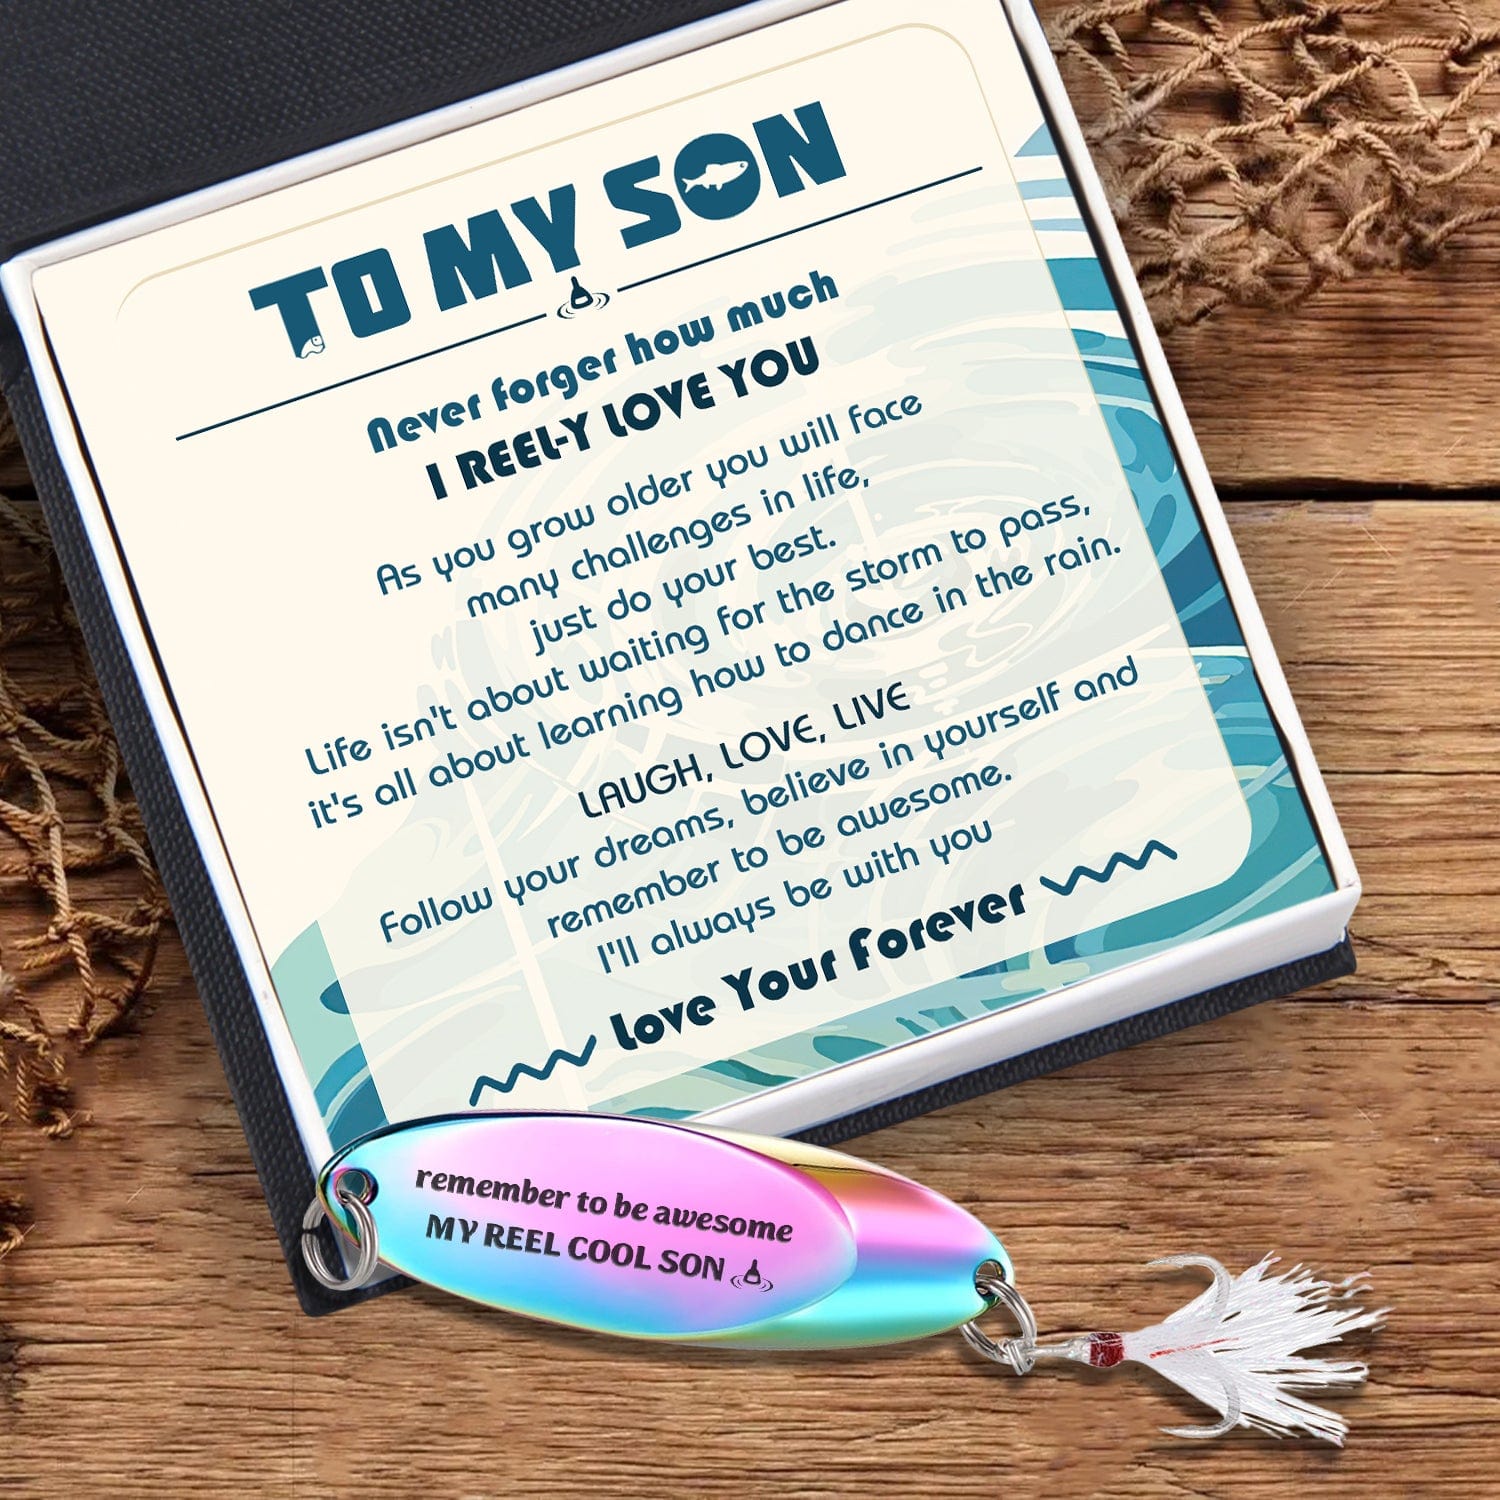 Sequin Fishing Bait - Fishing - To My Son - I'll Always Be With You - Gfab16001